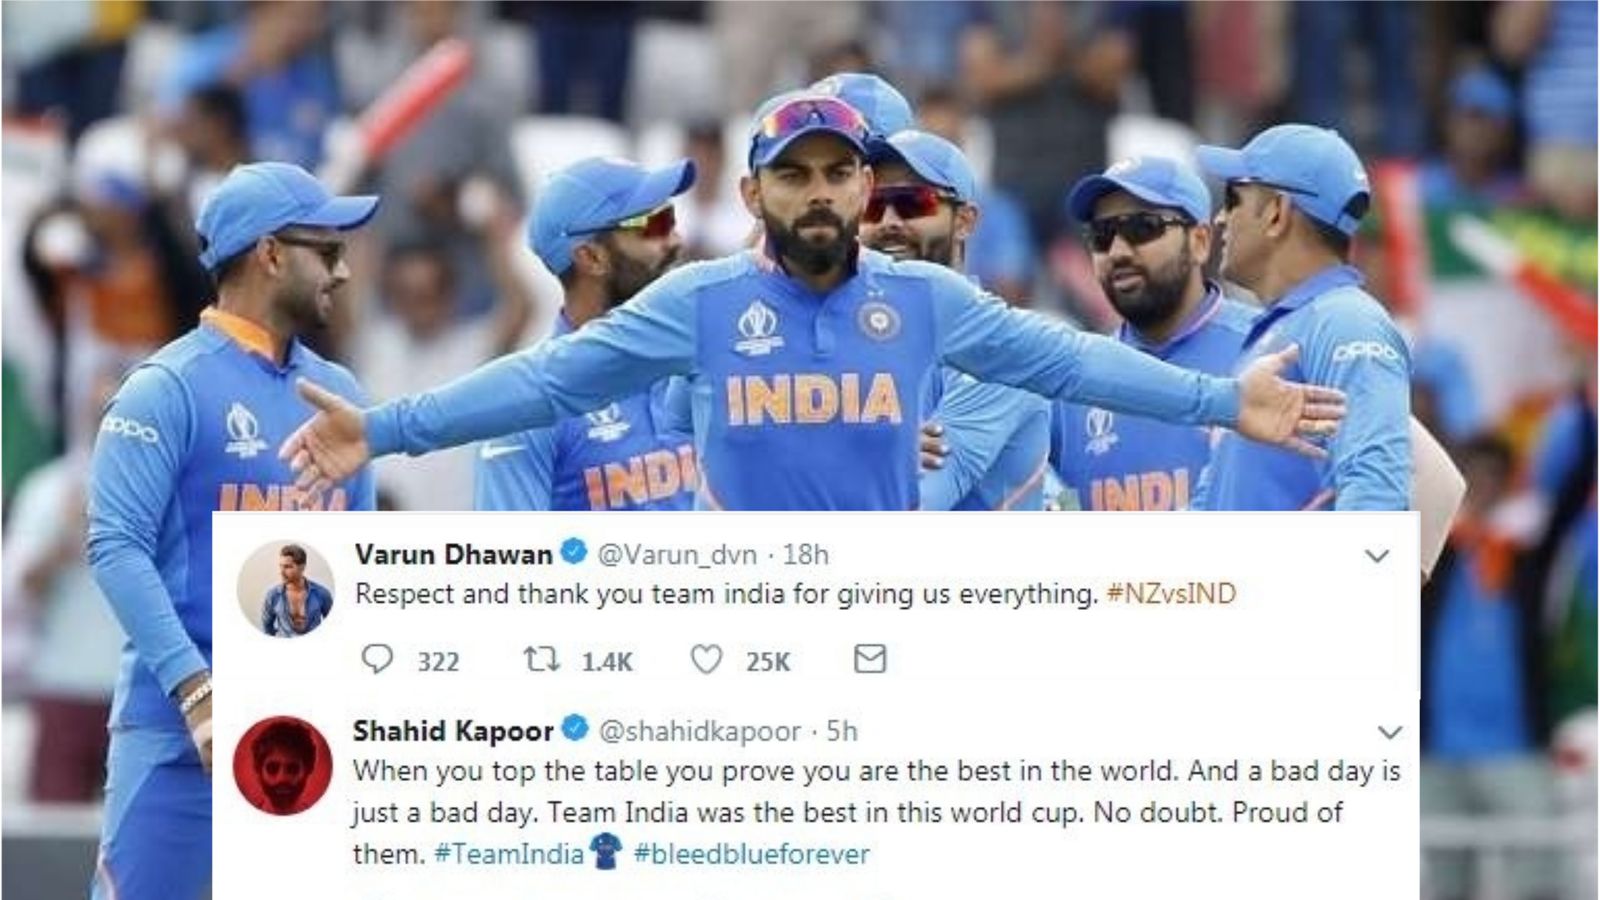 Cricket World Cup 2019: Bollywood Says 'Proud Of You' As Team India Loses To New Zealand In the Semi Finals